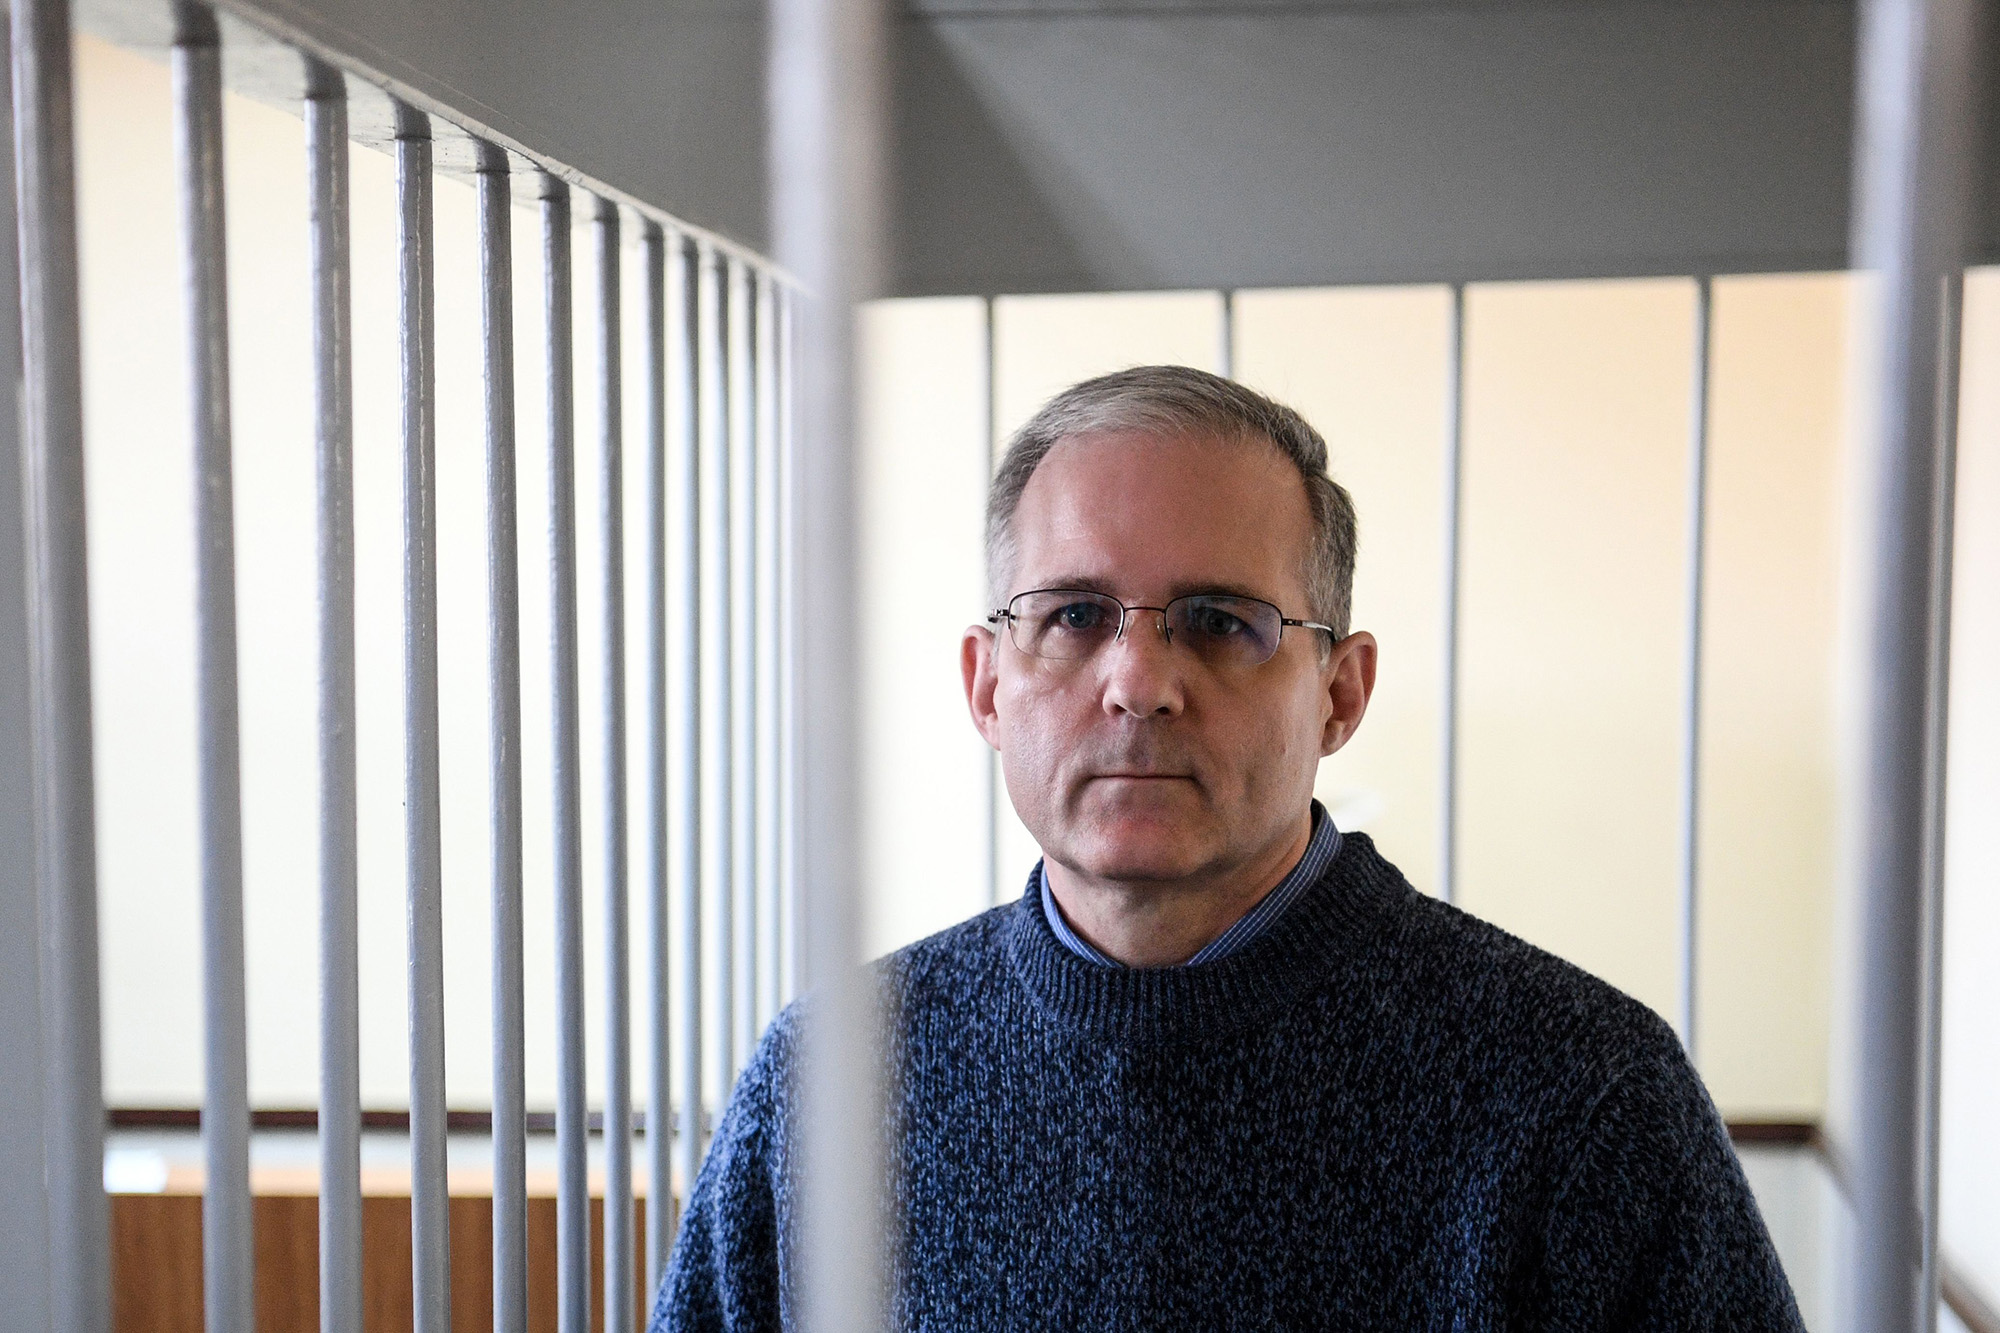 Paul Whelan stands in the defendant's cage during a hearing at a court in Moscow, Russia, August 23, 2019. 